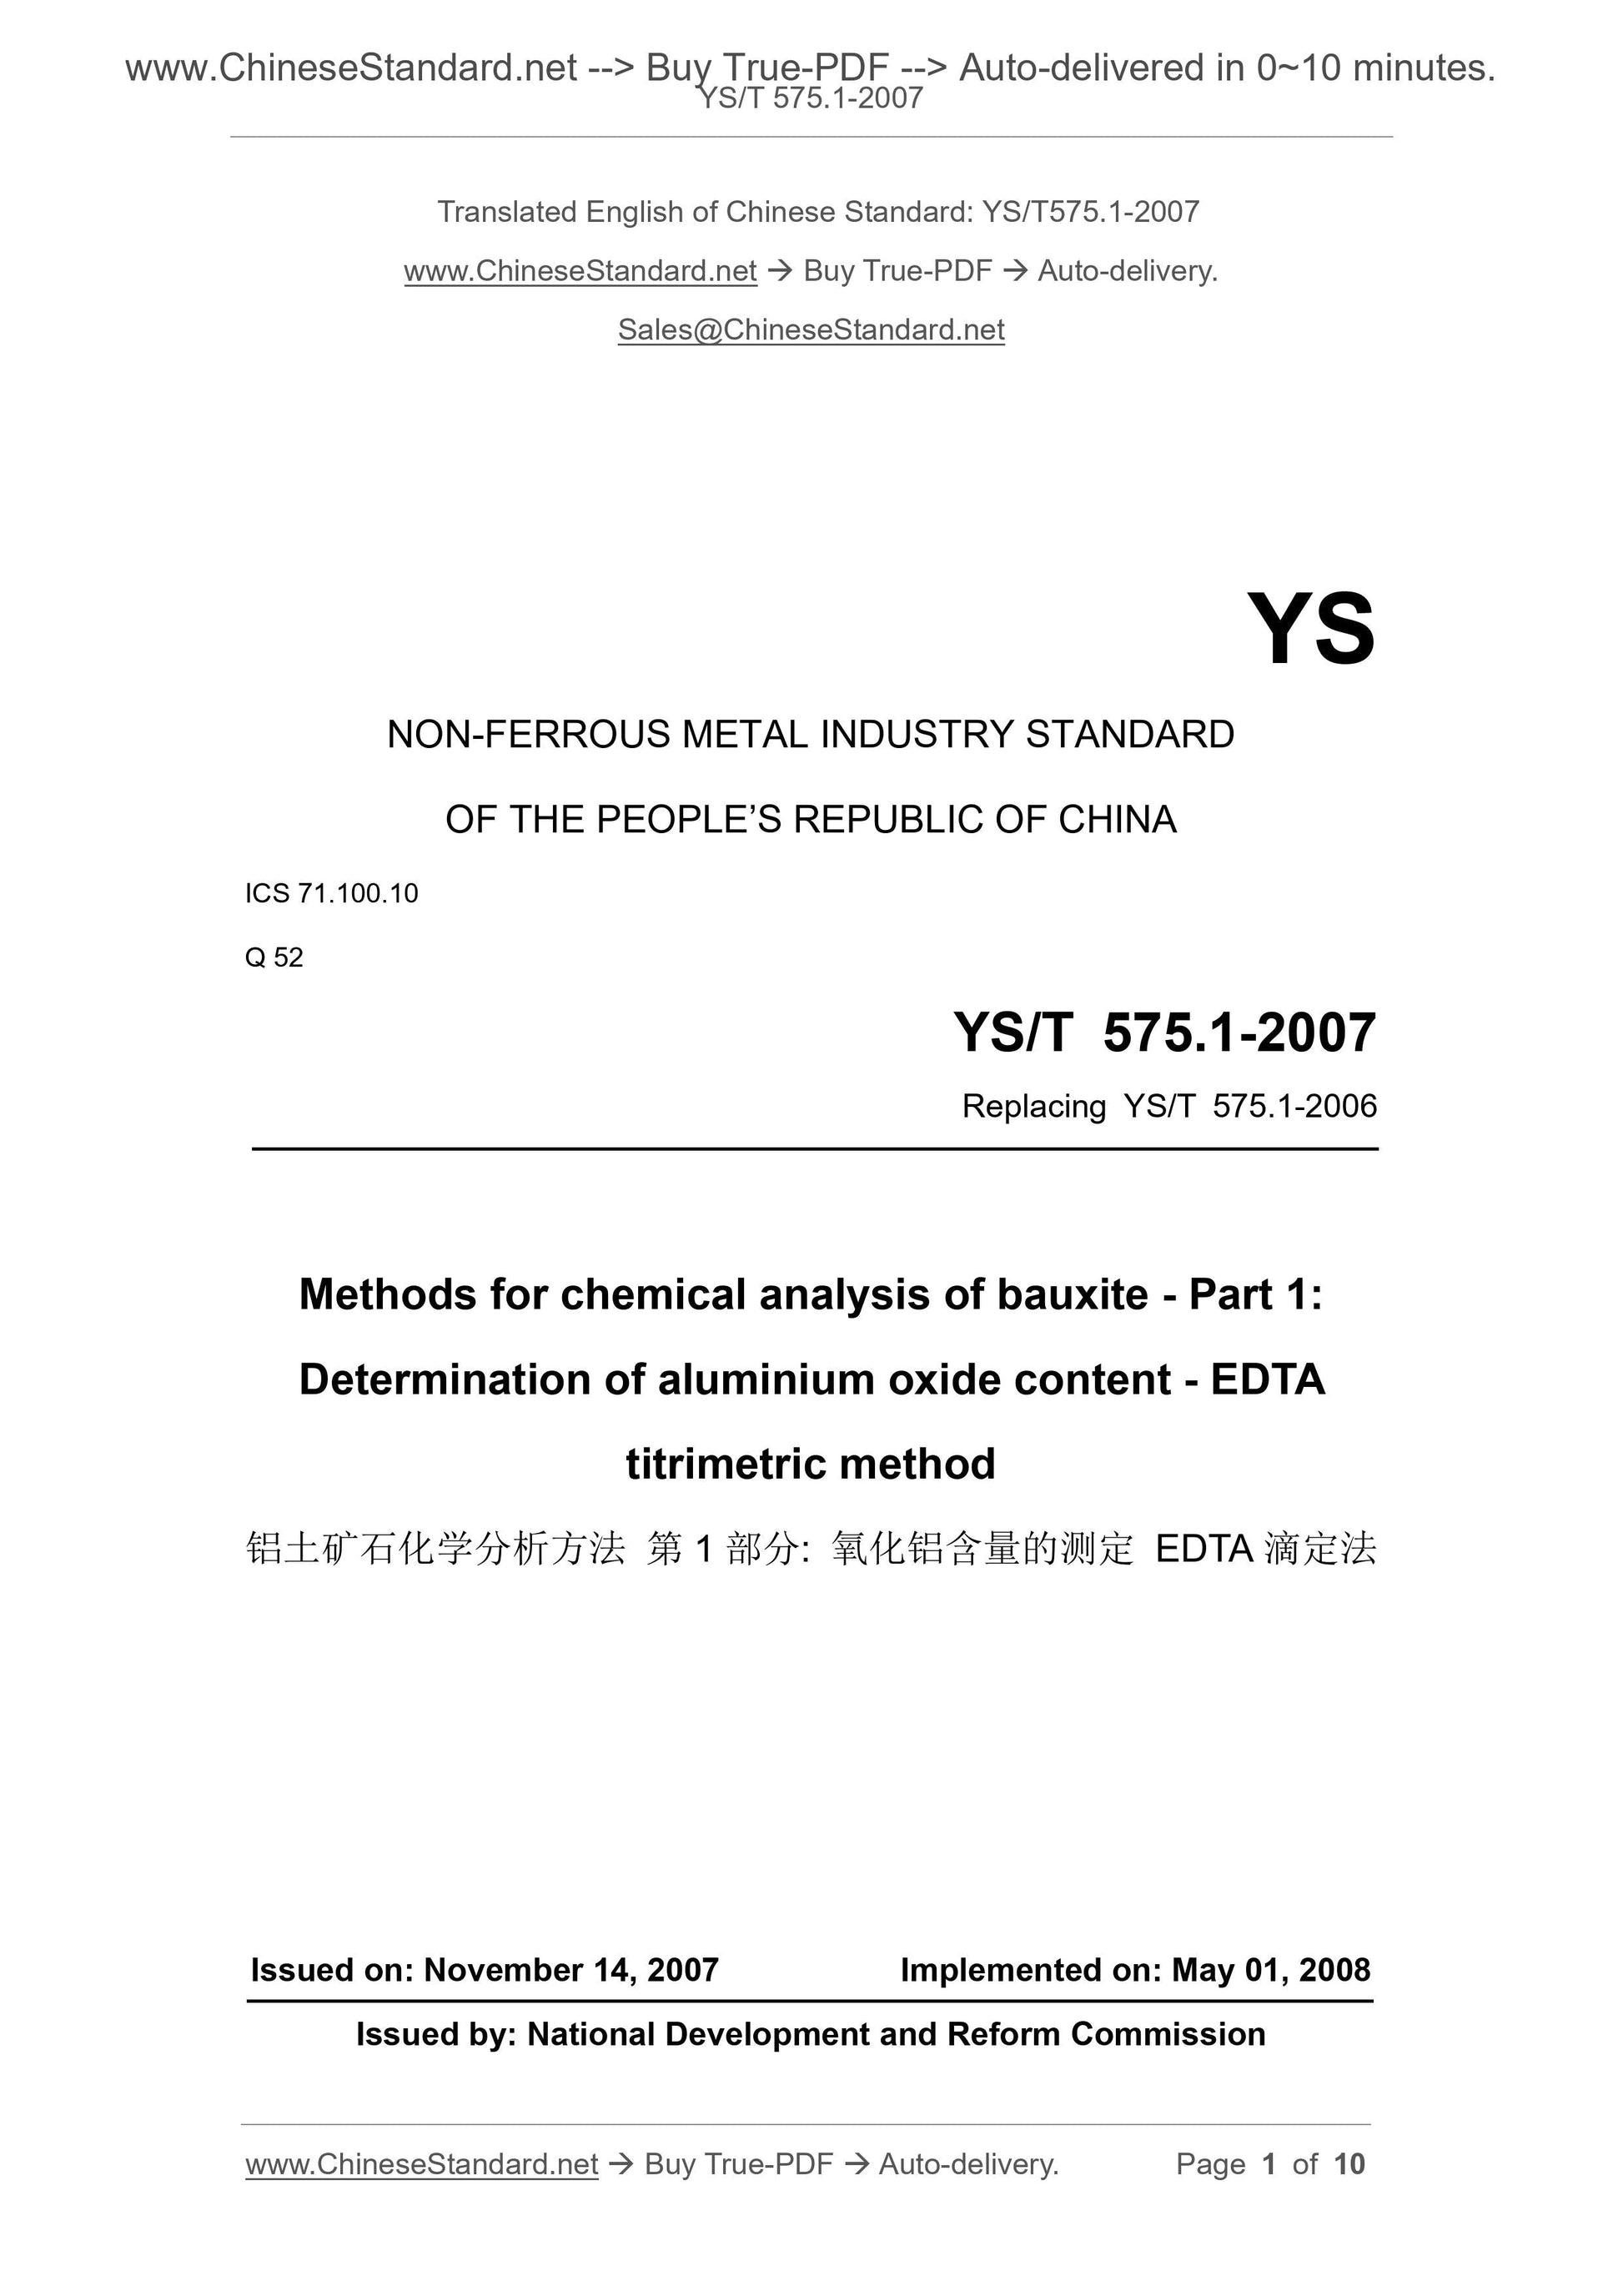 YS/T 575.1-2007 Page 1